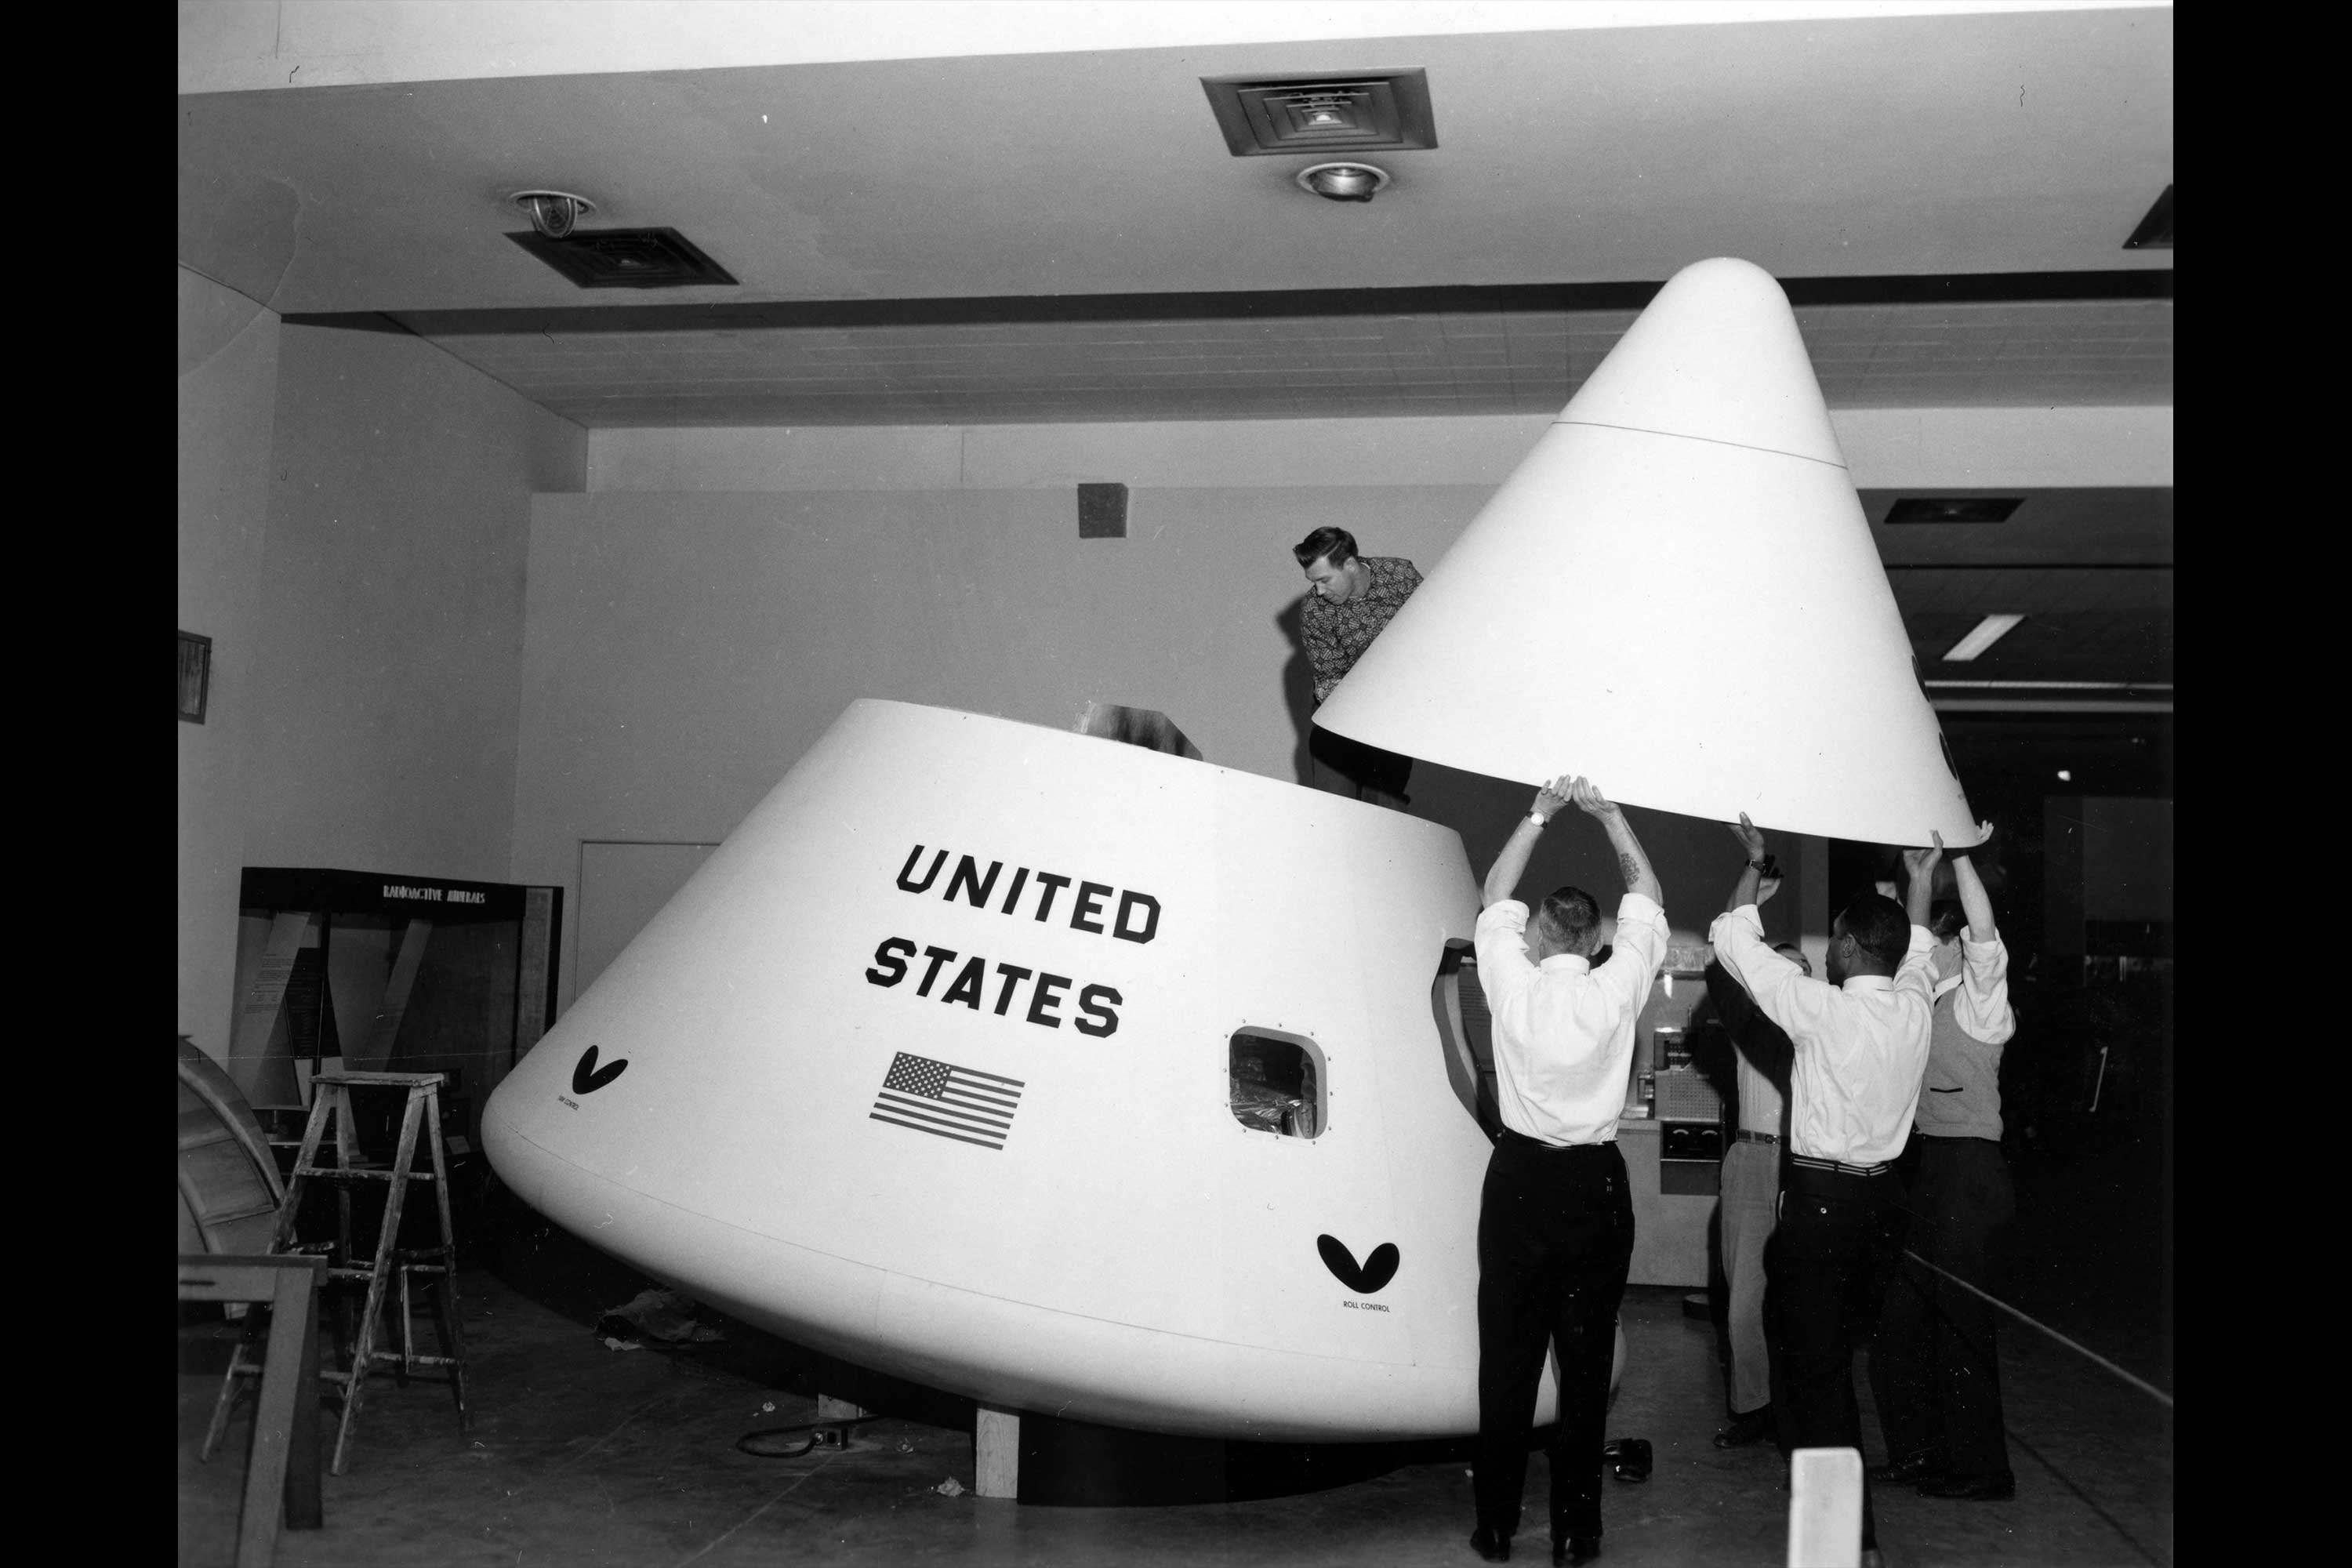 Apollo Space Capsule. This is a photograph of the Apollo command module being assembled by Museum staff.